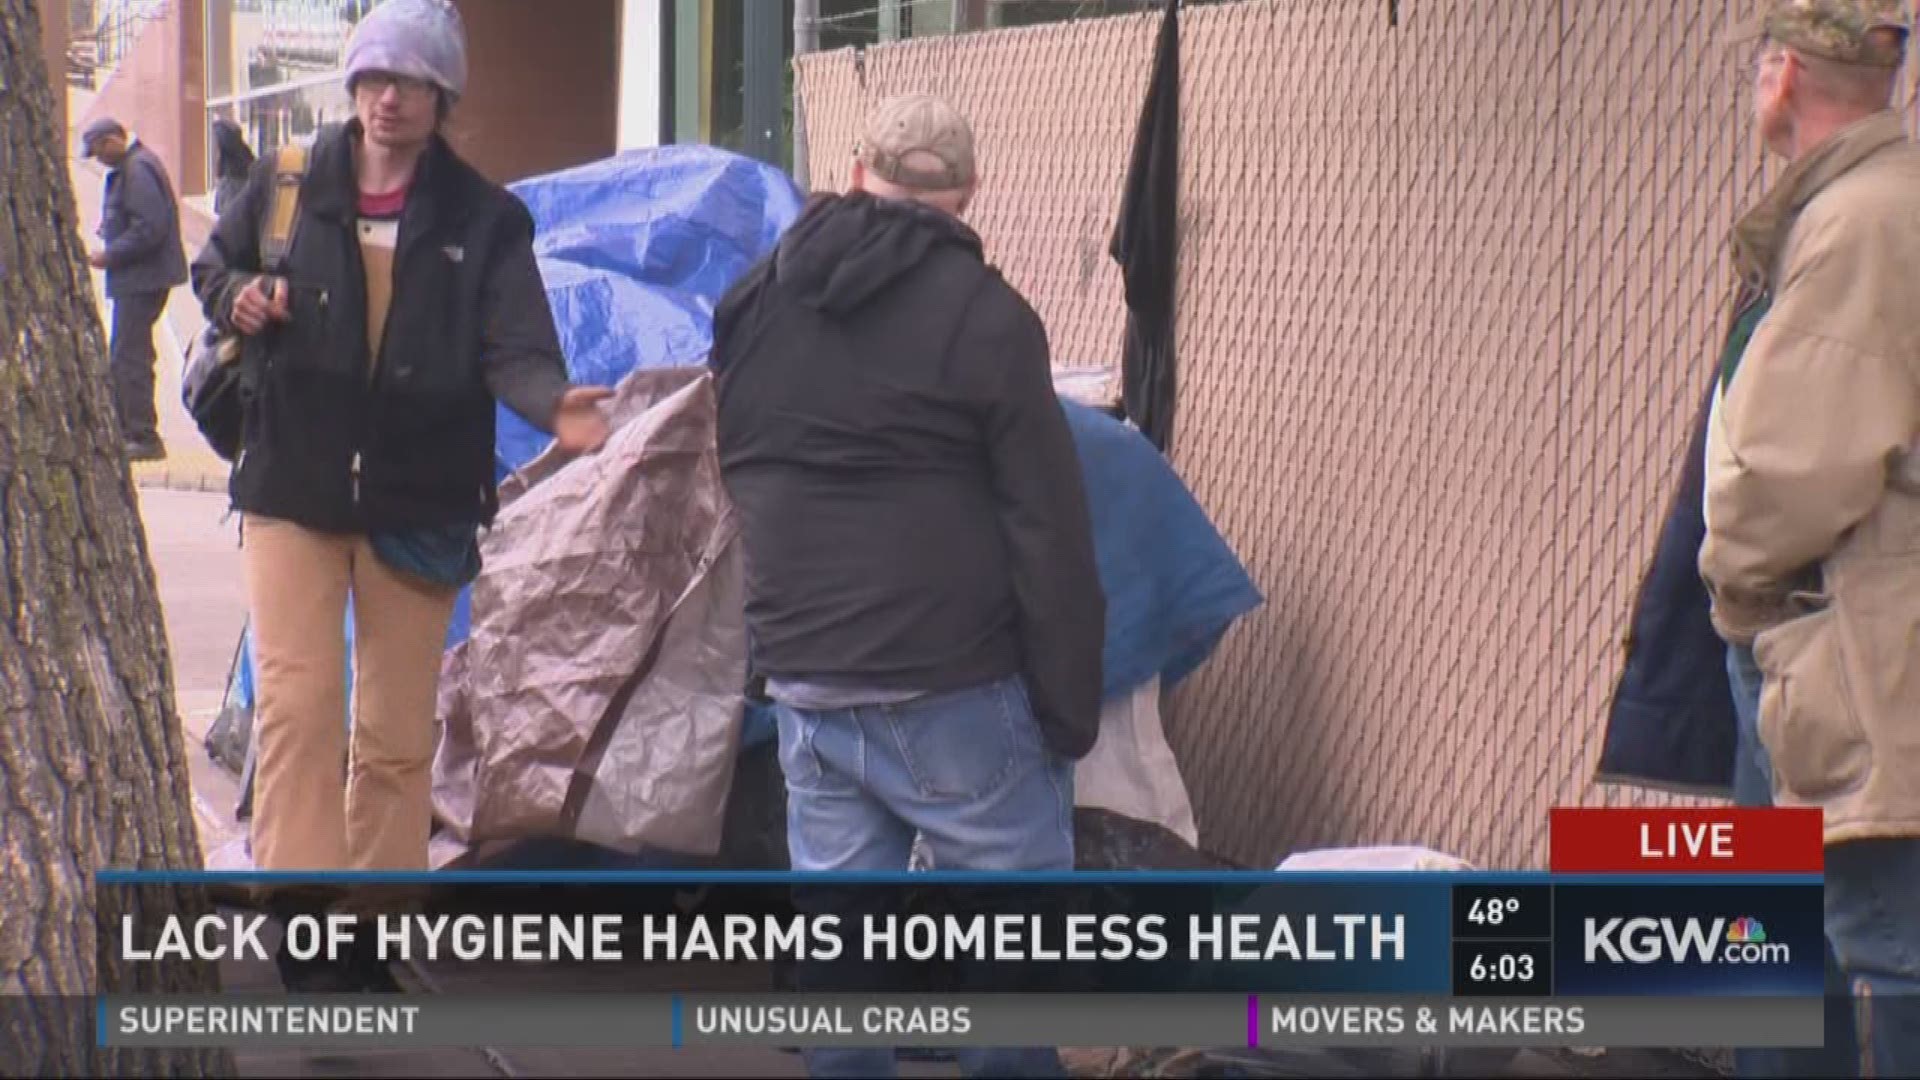 Study finds homeless need more hygiene access